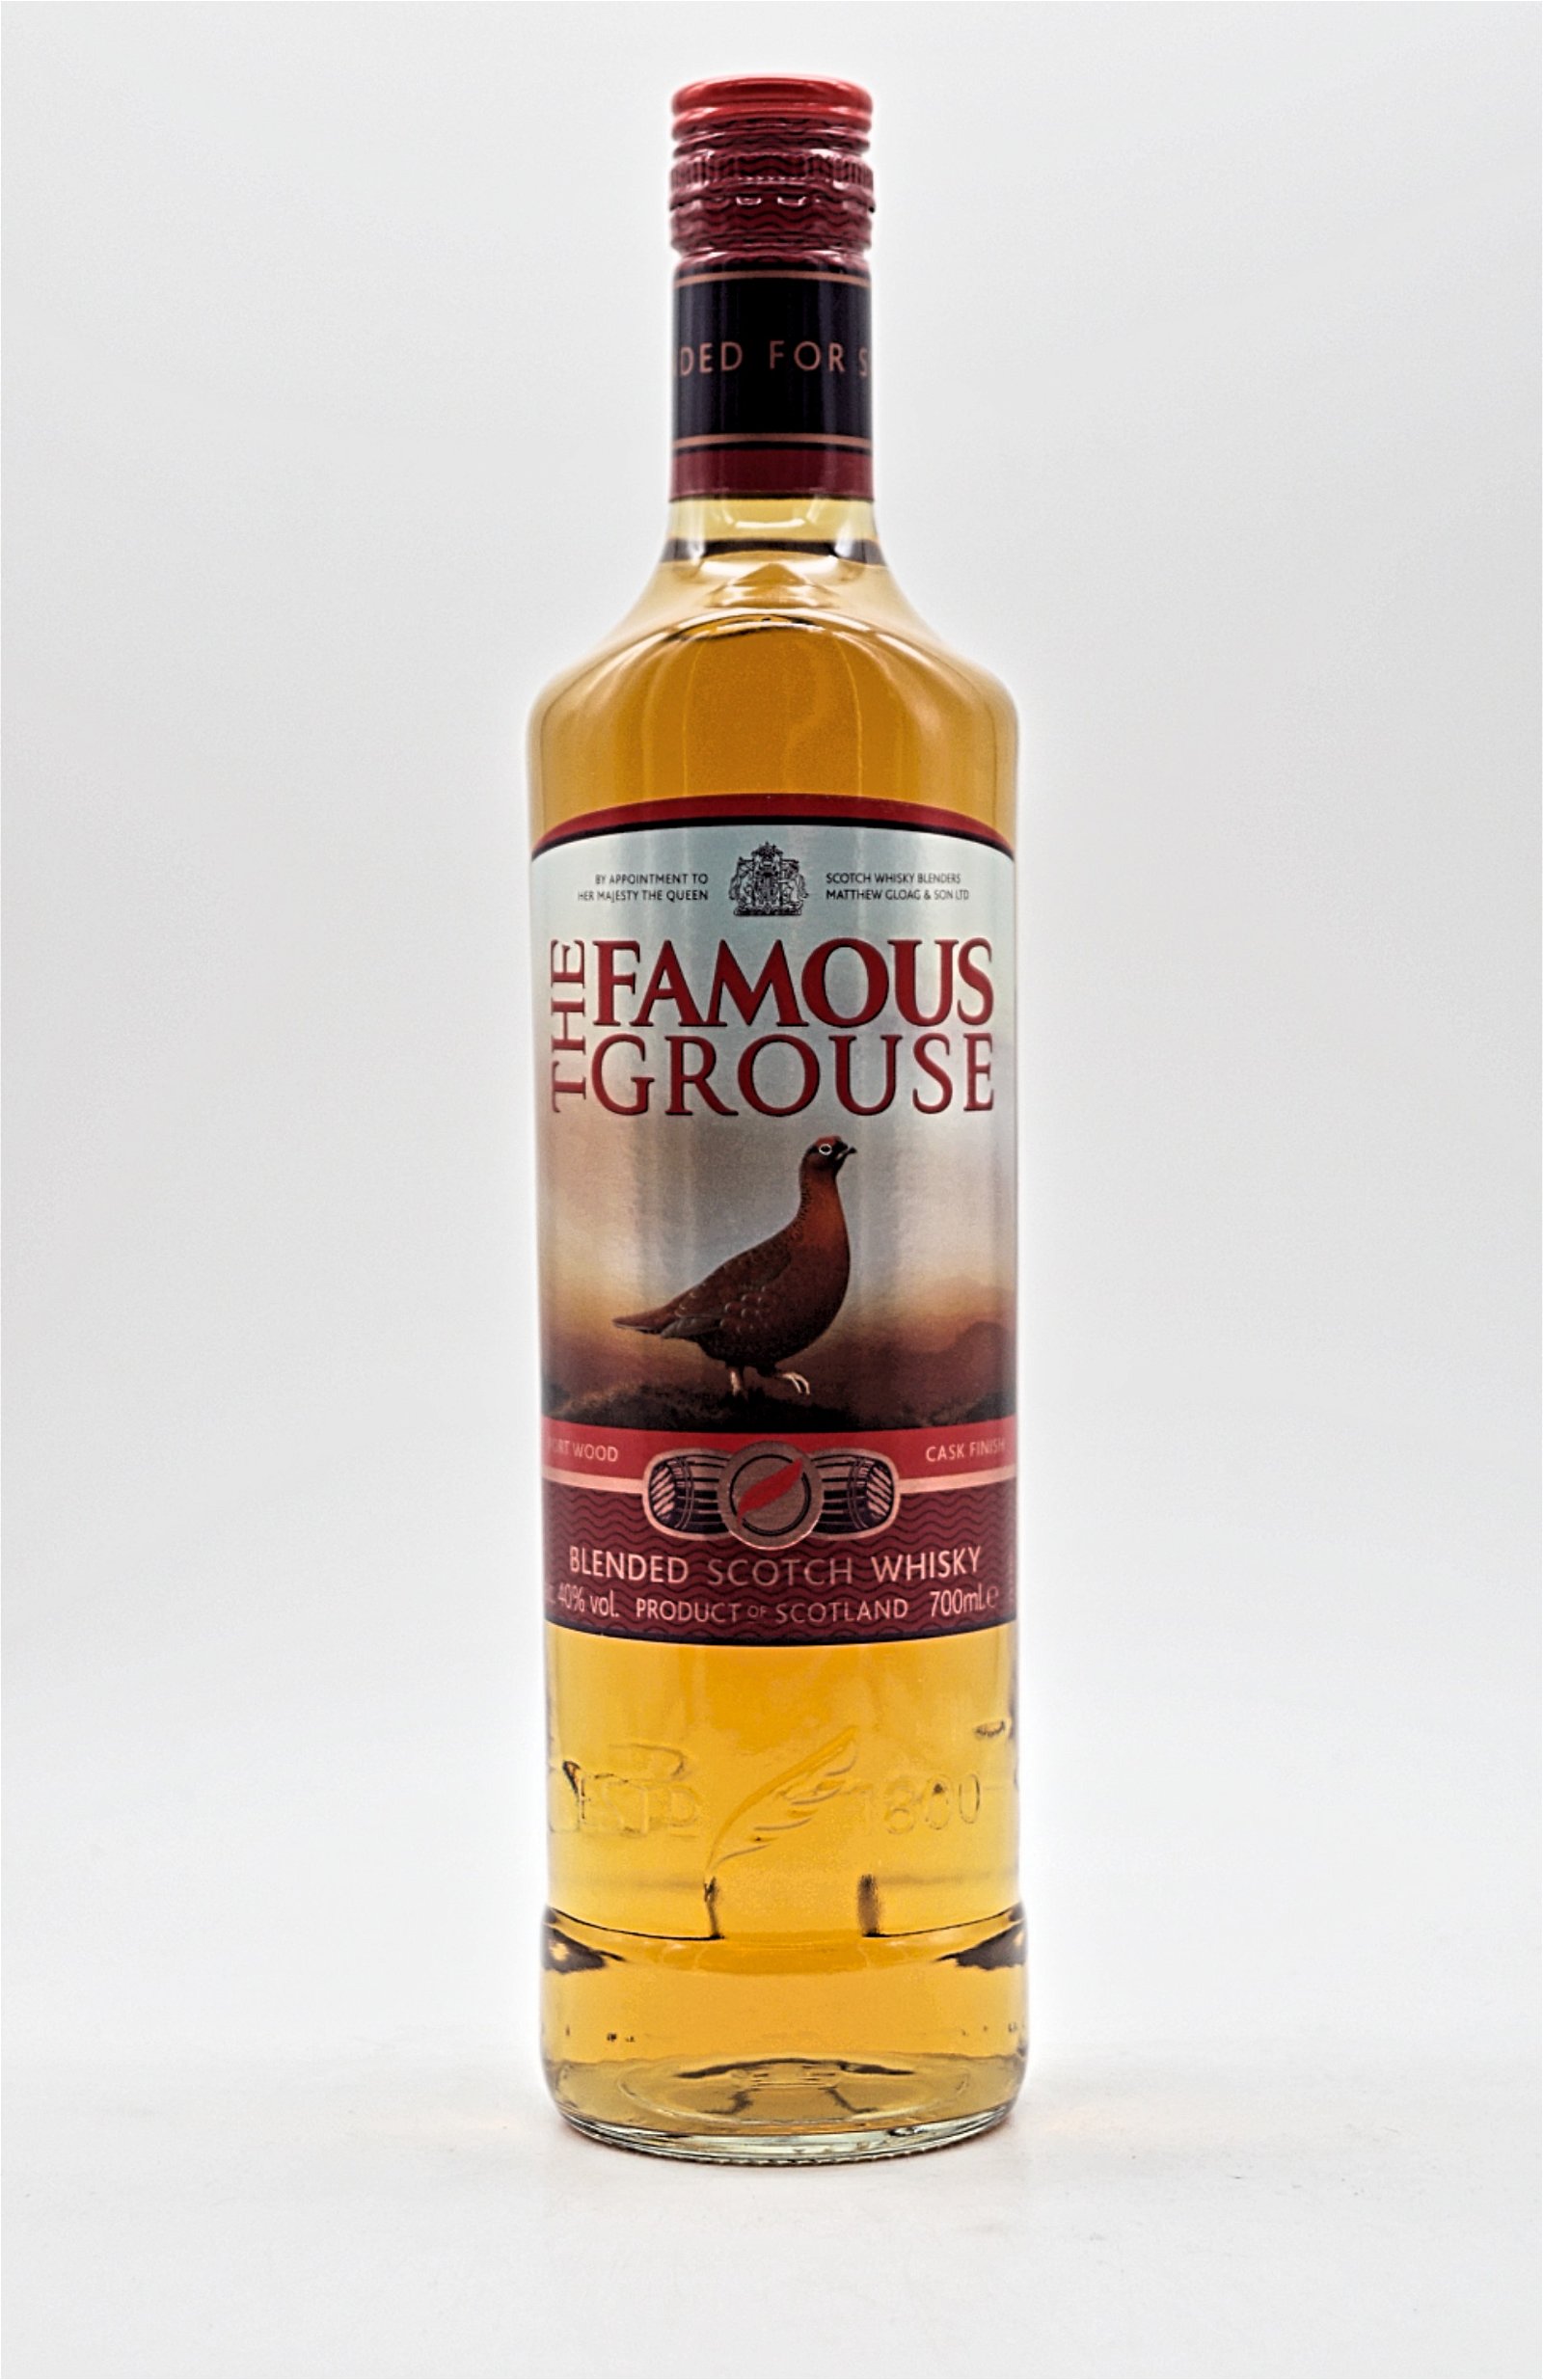 The Famous Grouse Port Wood Cask Finisch Blended Scotch Whisky